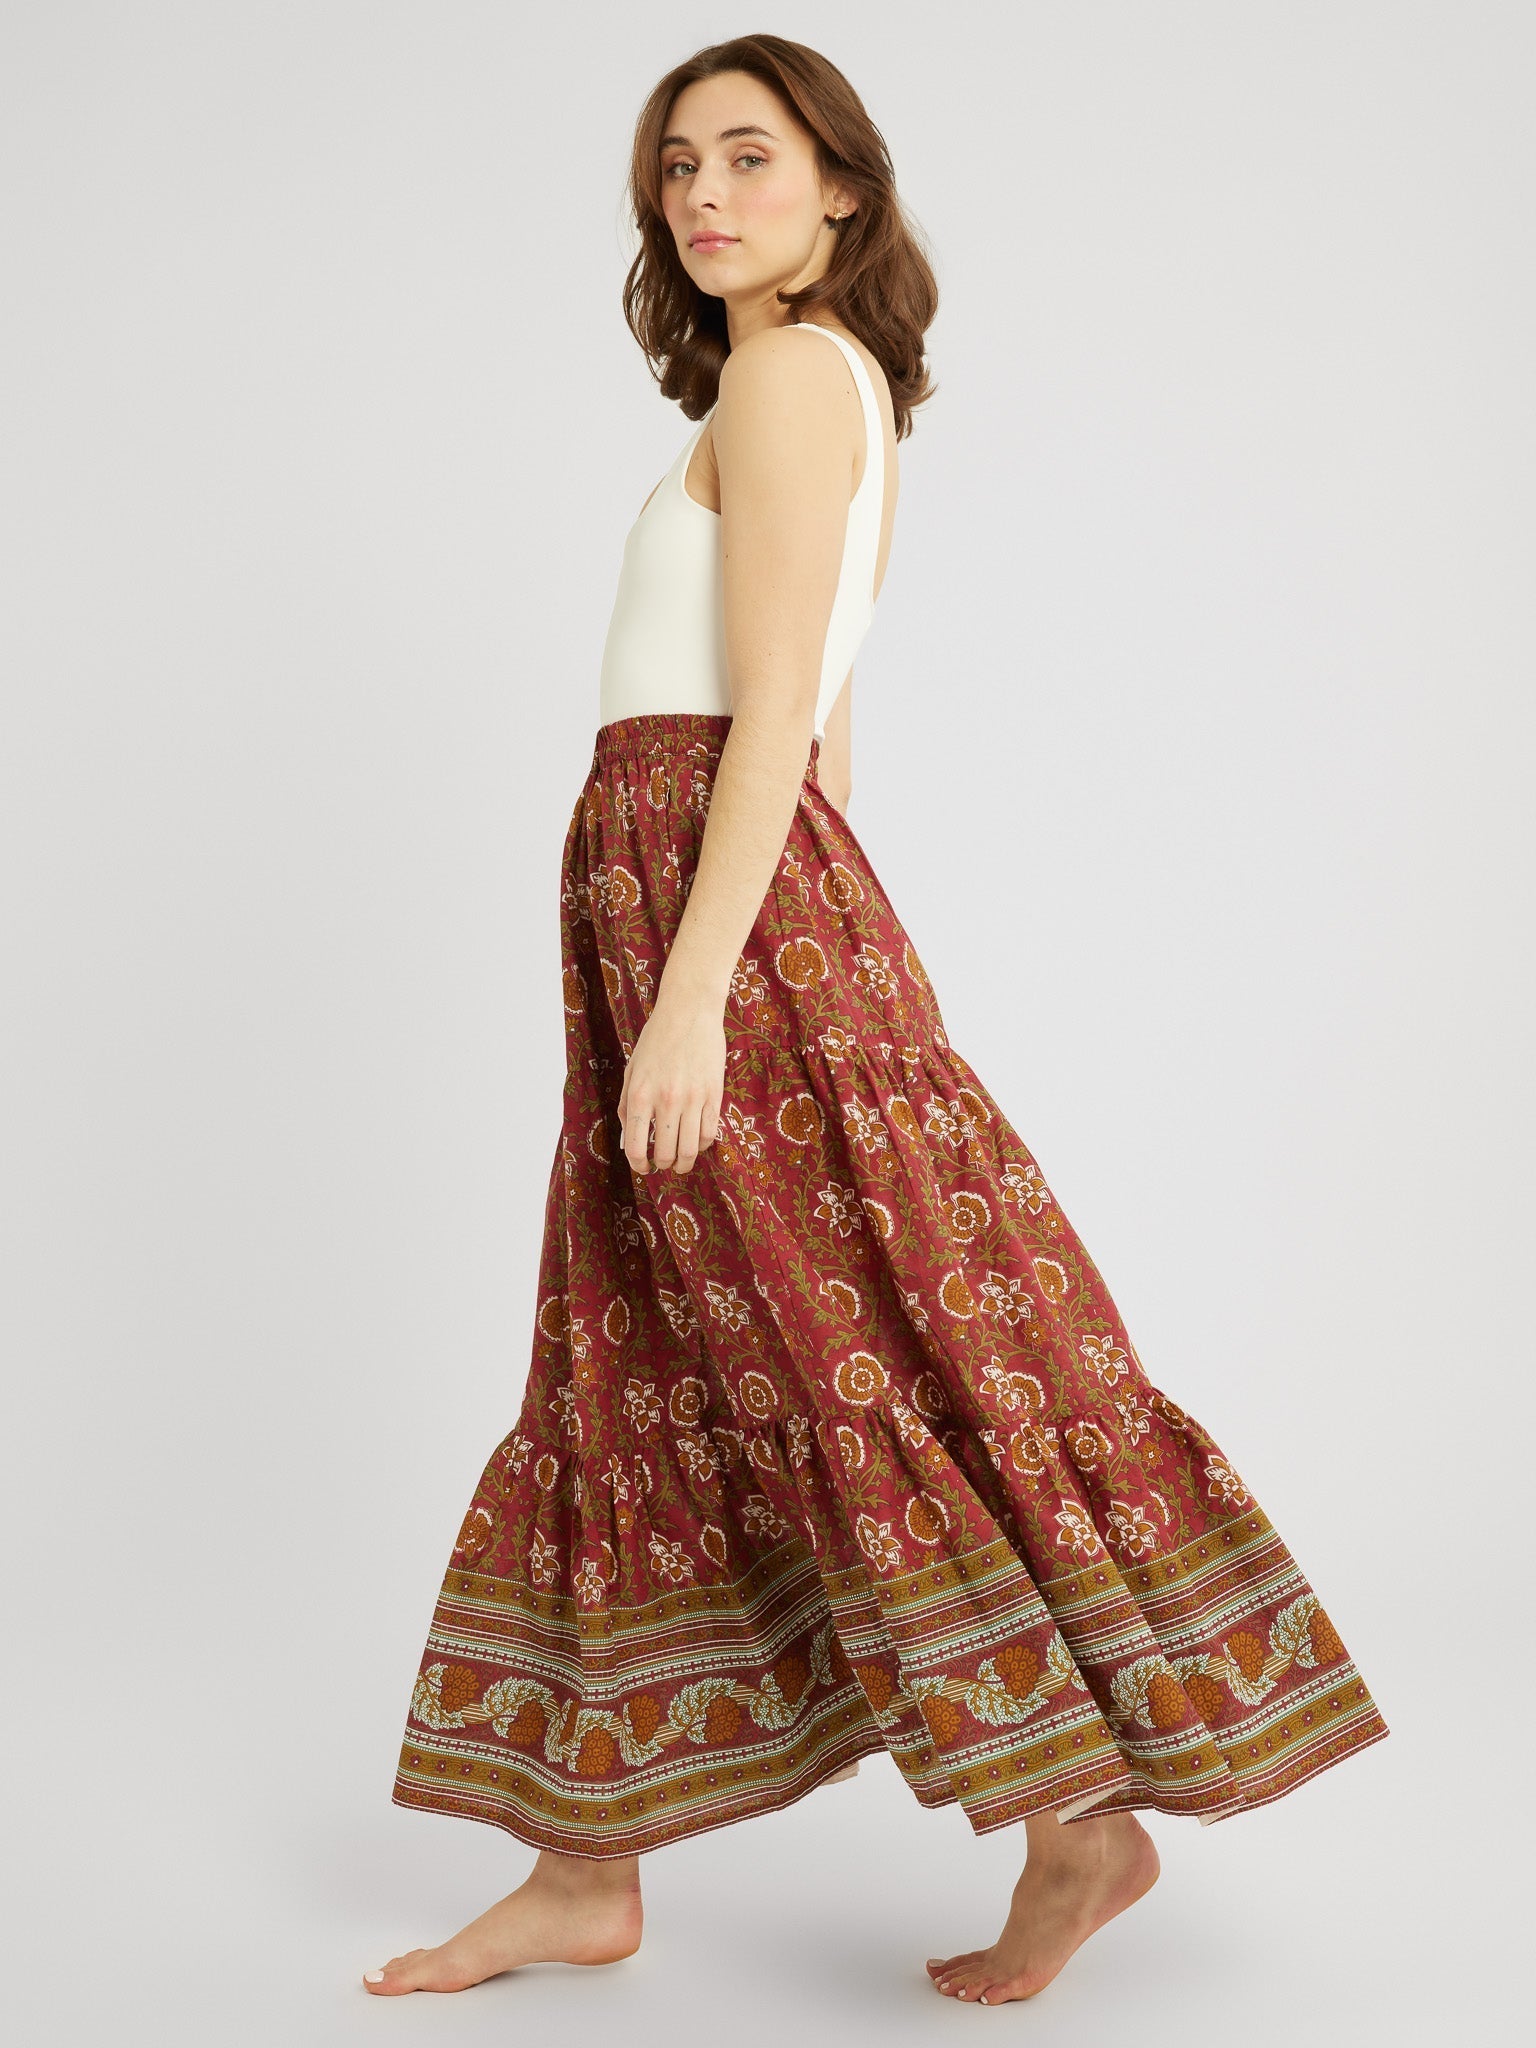 MILLE Clothing Paola Skirt in Cinnabar